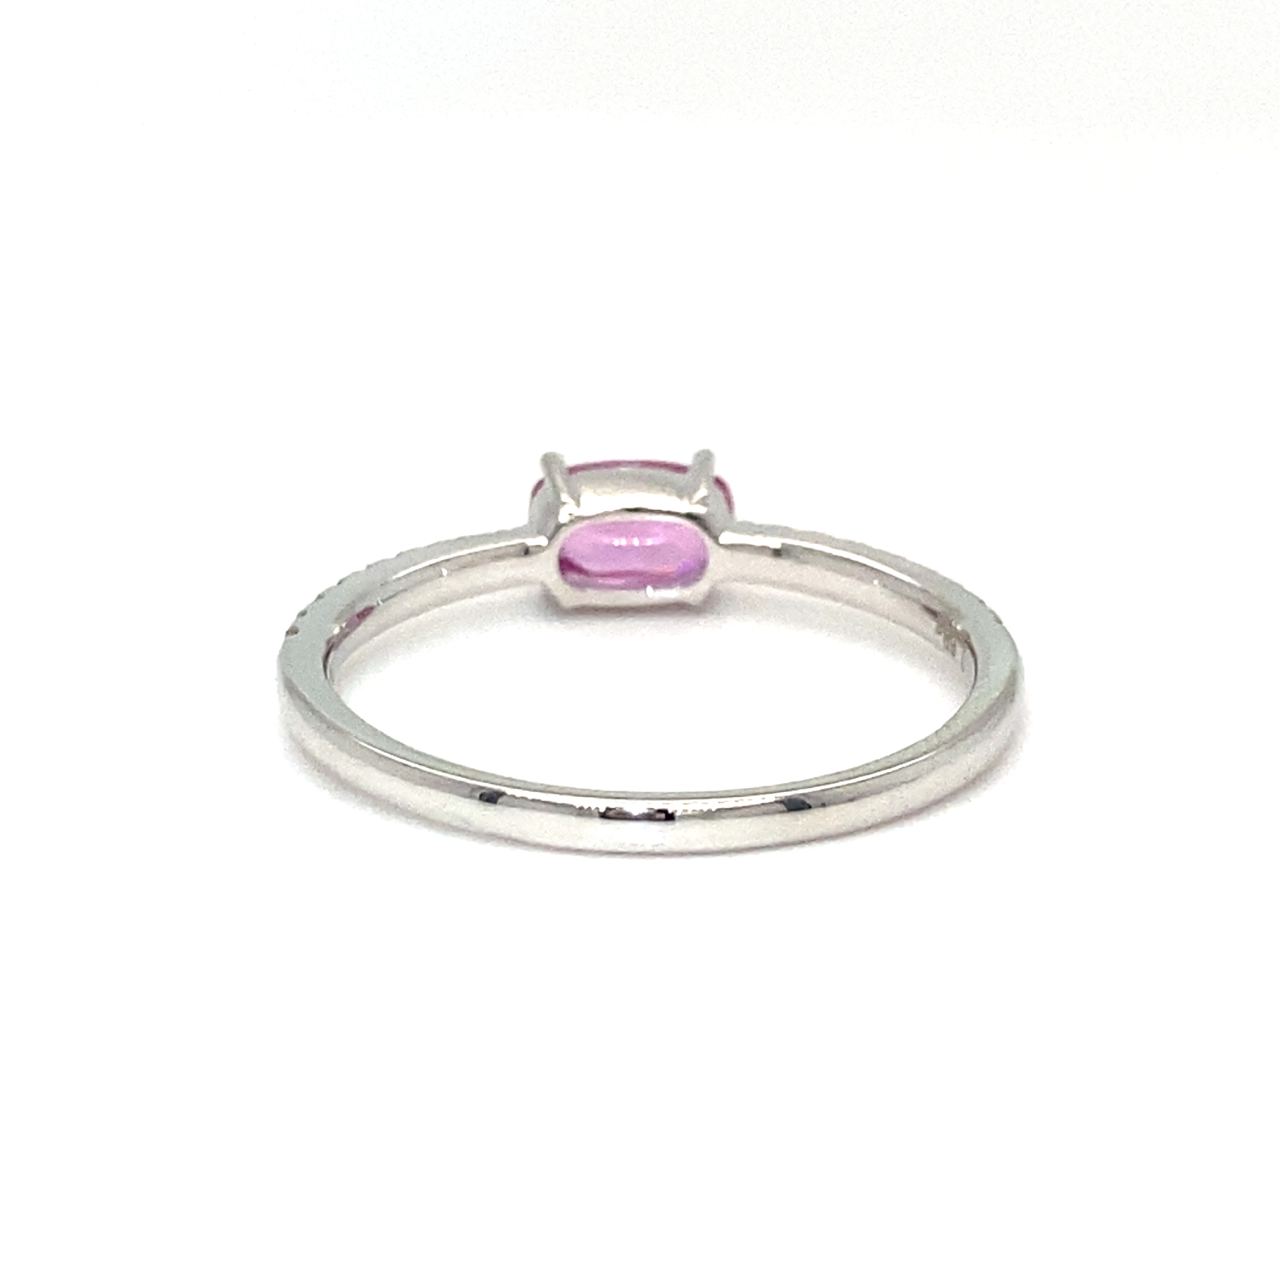 18K White Gold Pink Sapphire Oval Shape Simple Stack Diamond Ring